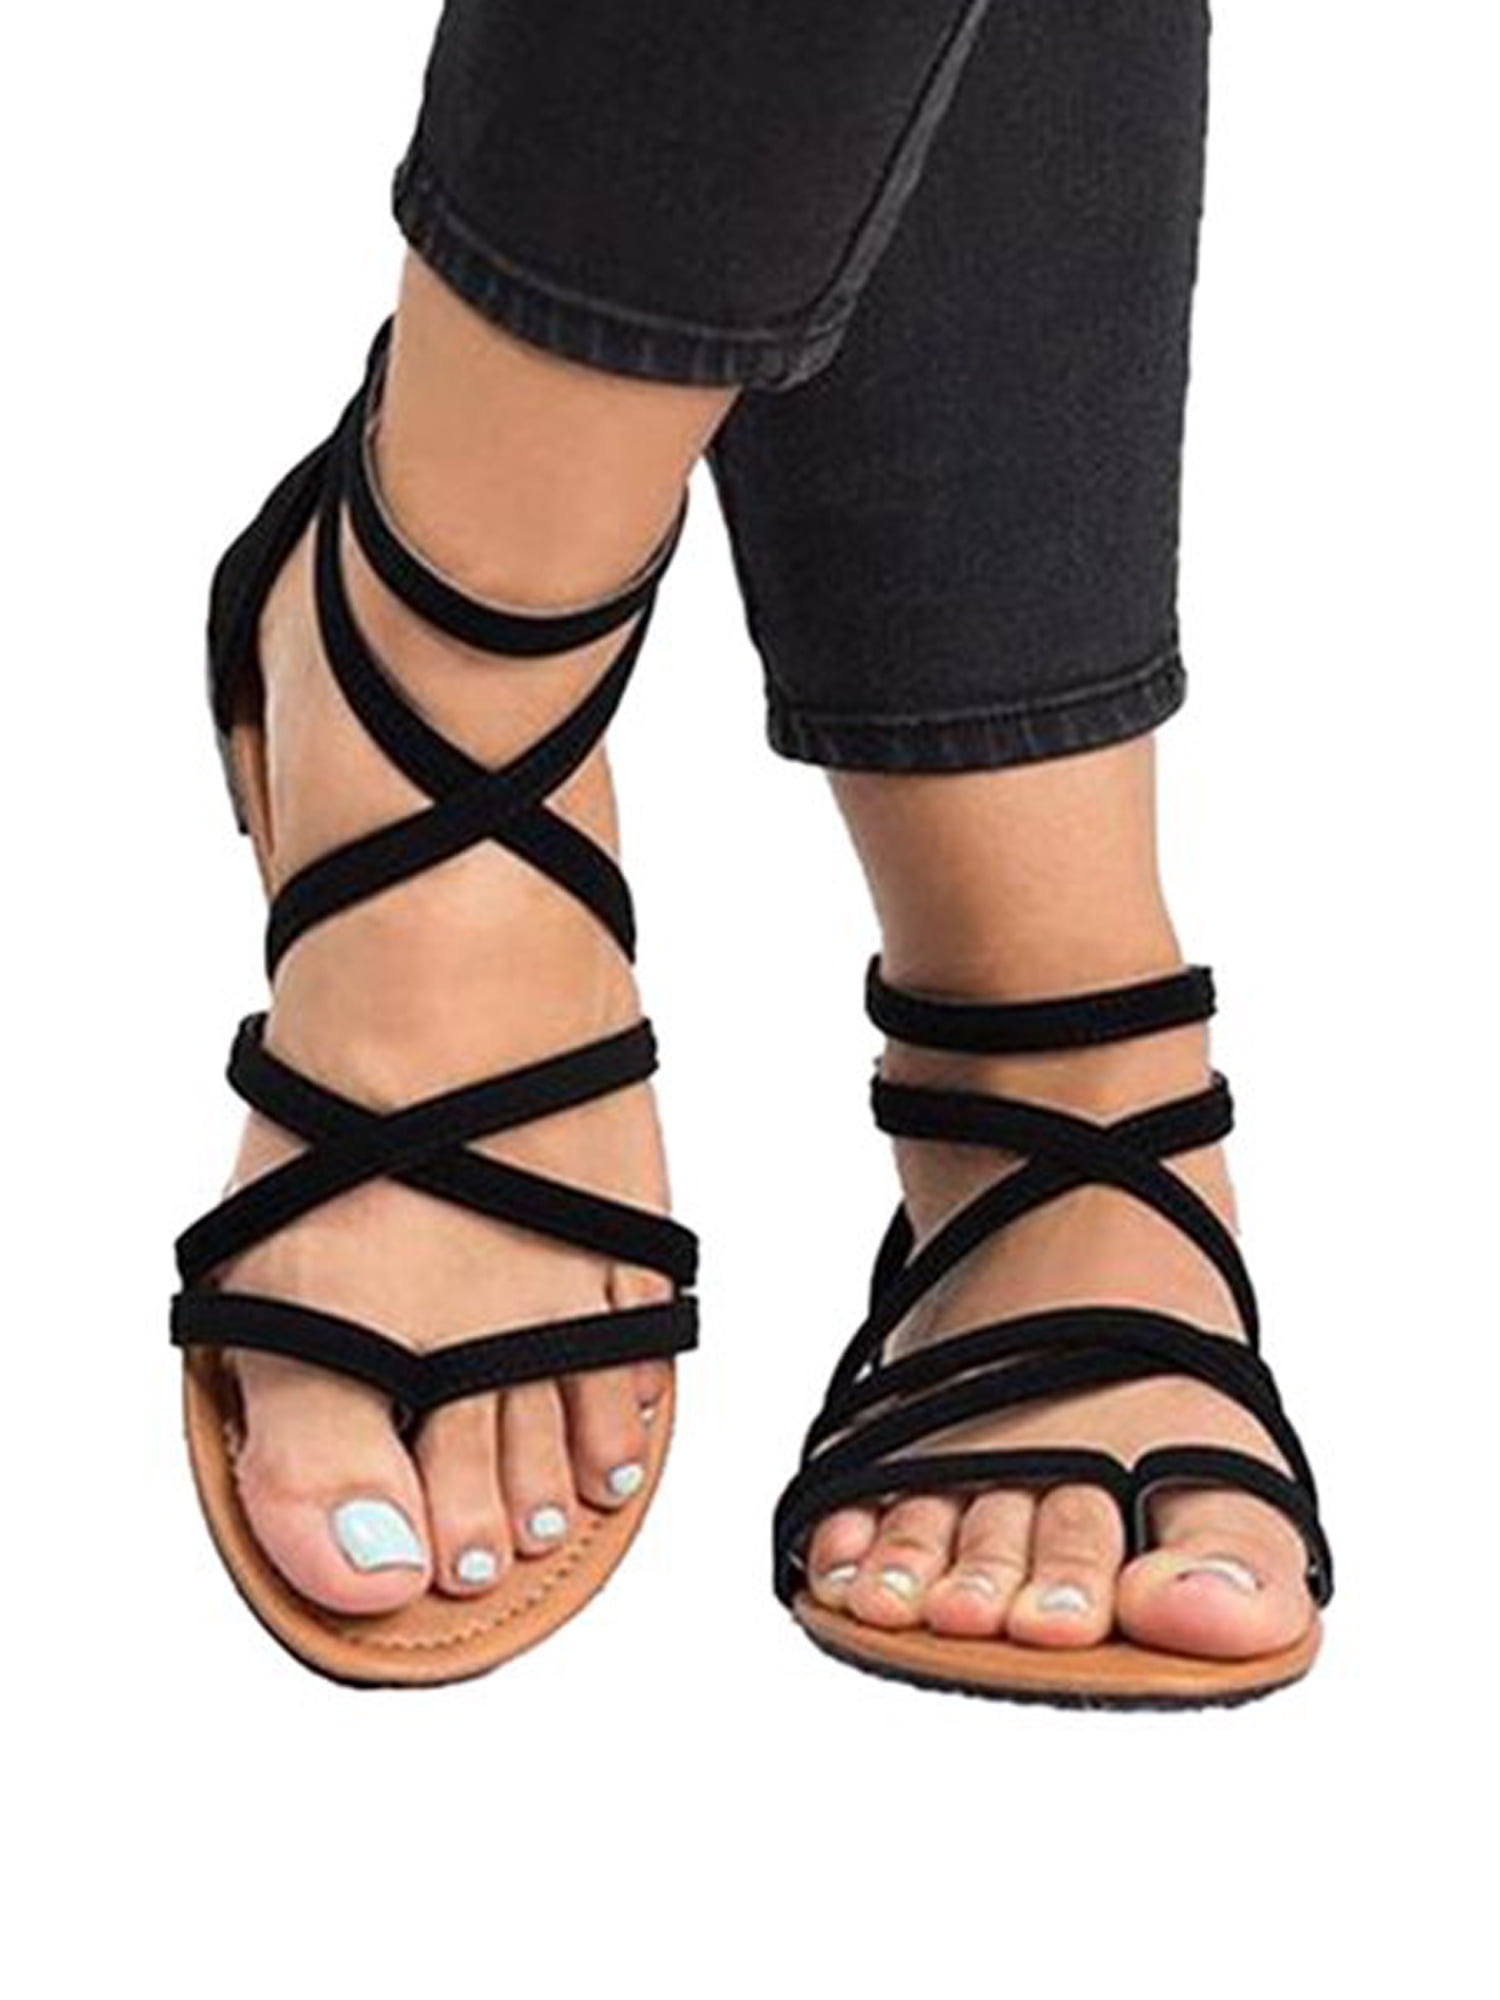 Fashion Ankle Strap Gladiator Sandals Women Fringe Lace-Up Rome Flat Sandals Summer Casual Ladies Shoes Black 37